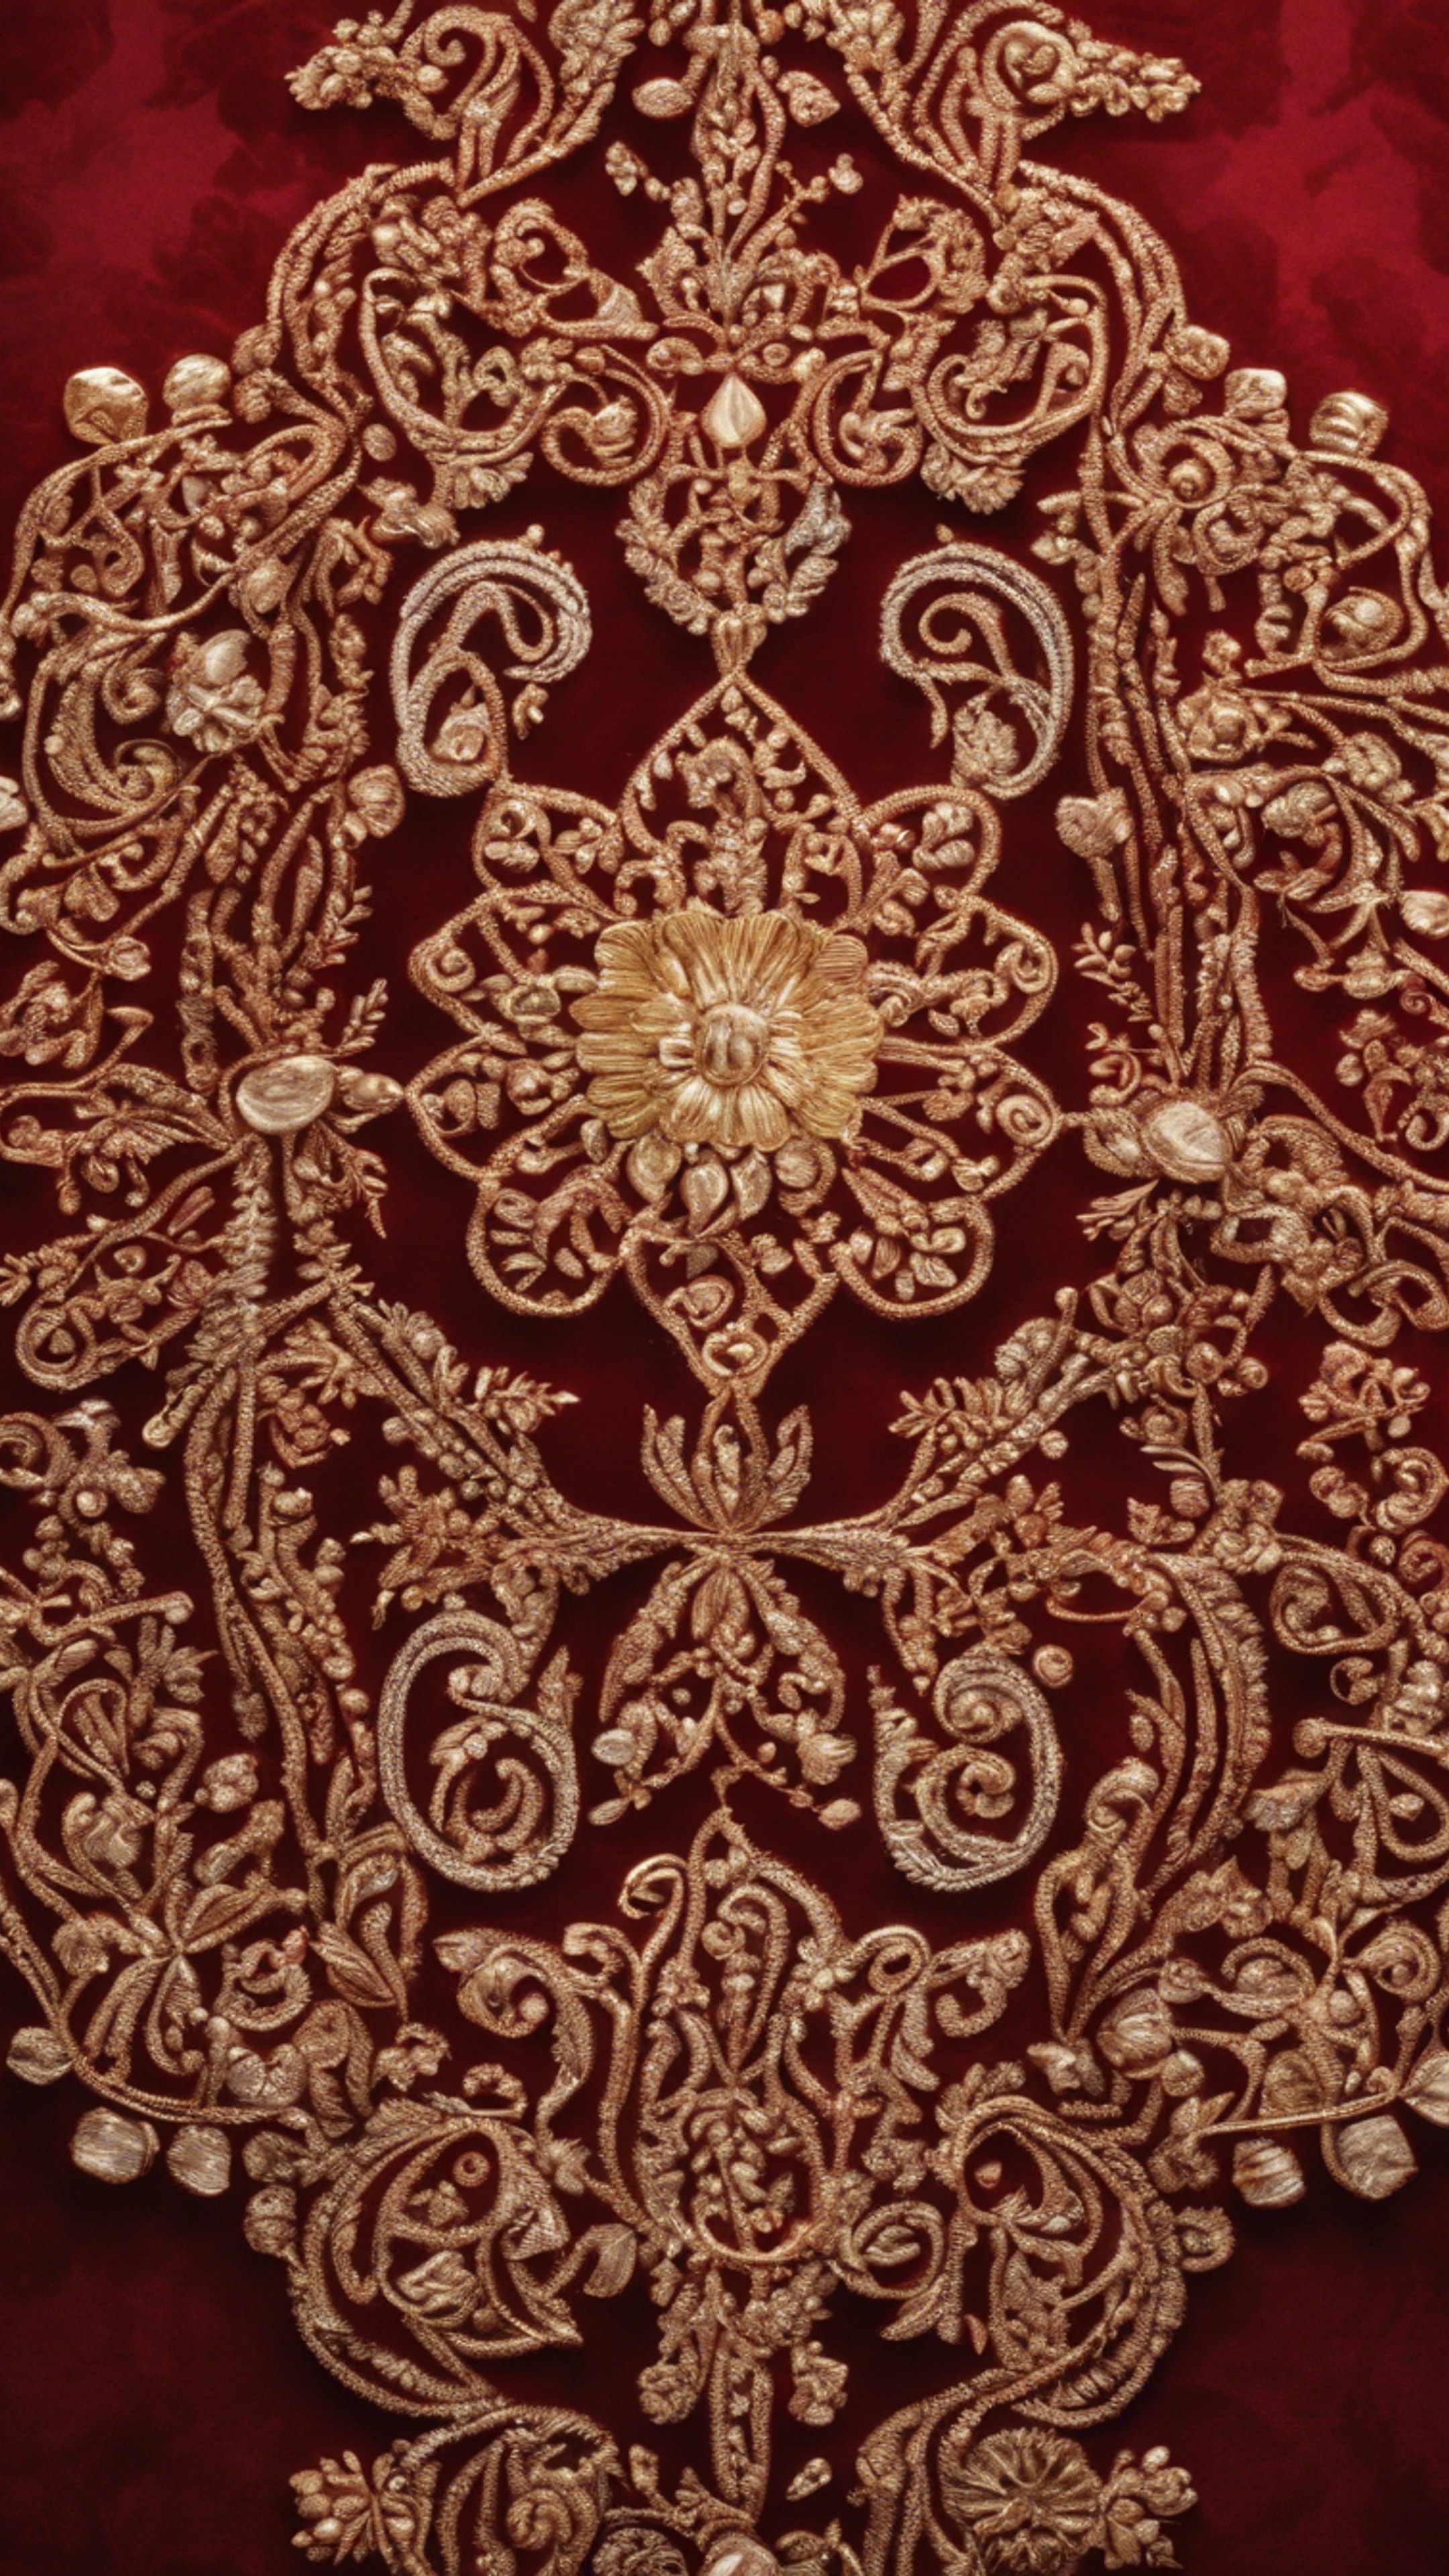 A mesmerizing design of intricate gold embroidery adorned over fiery red velvet.壁紙[a17599ee07084b7c979d]